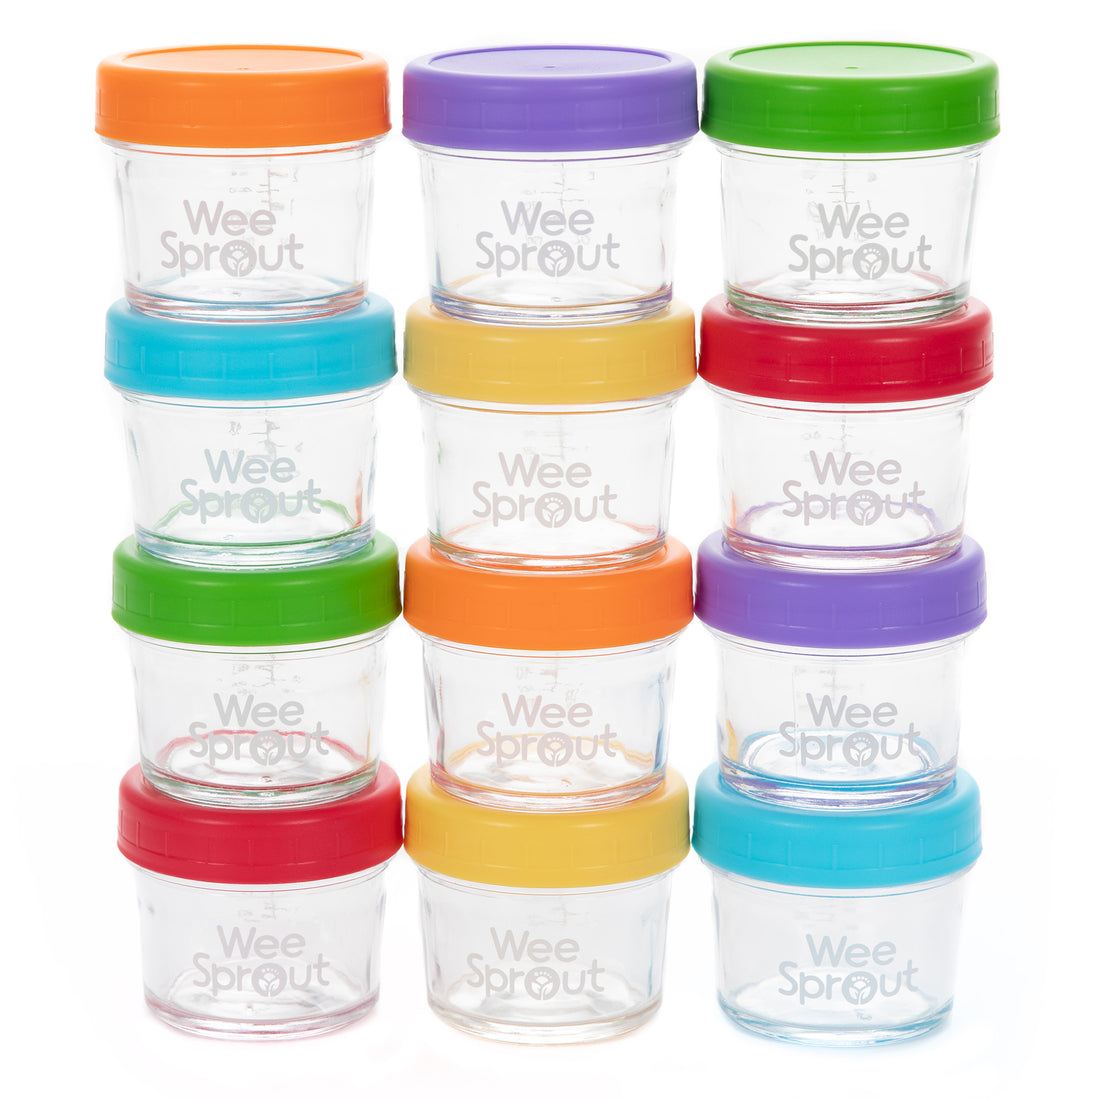 Save on Glad To Go Snack Containers & Lids 24 oz Order Online Delivery